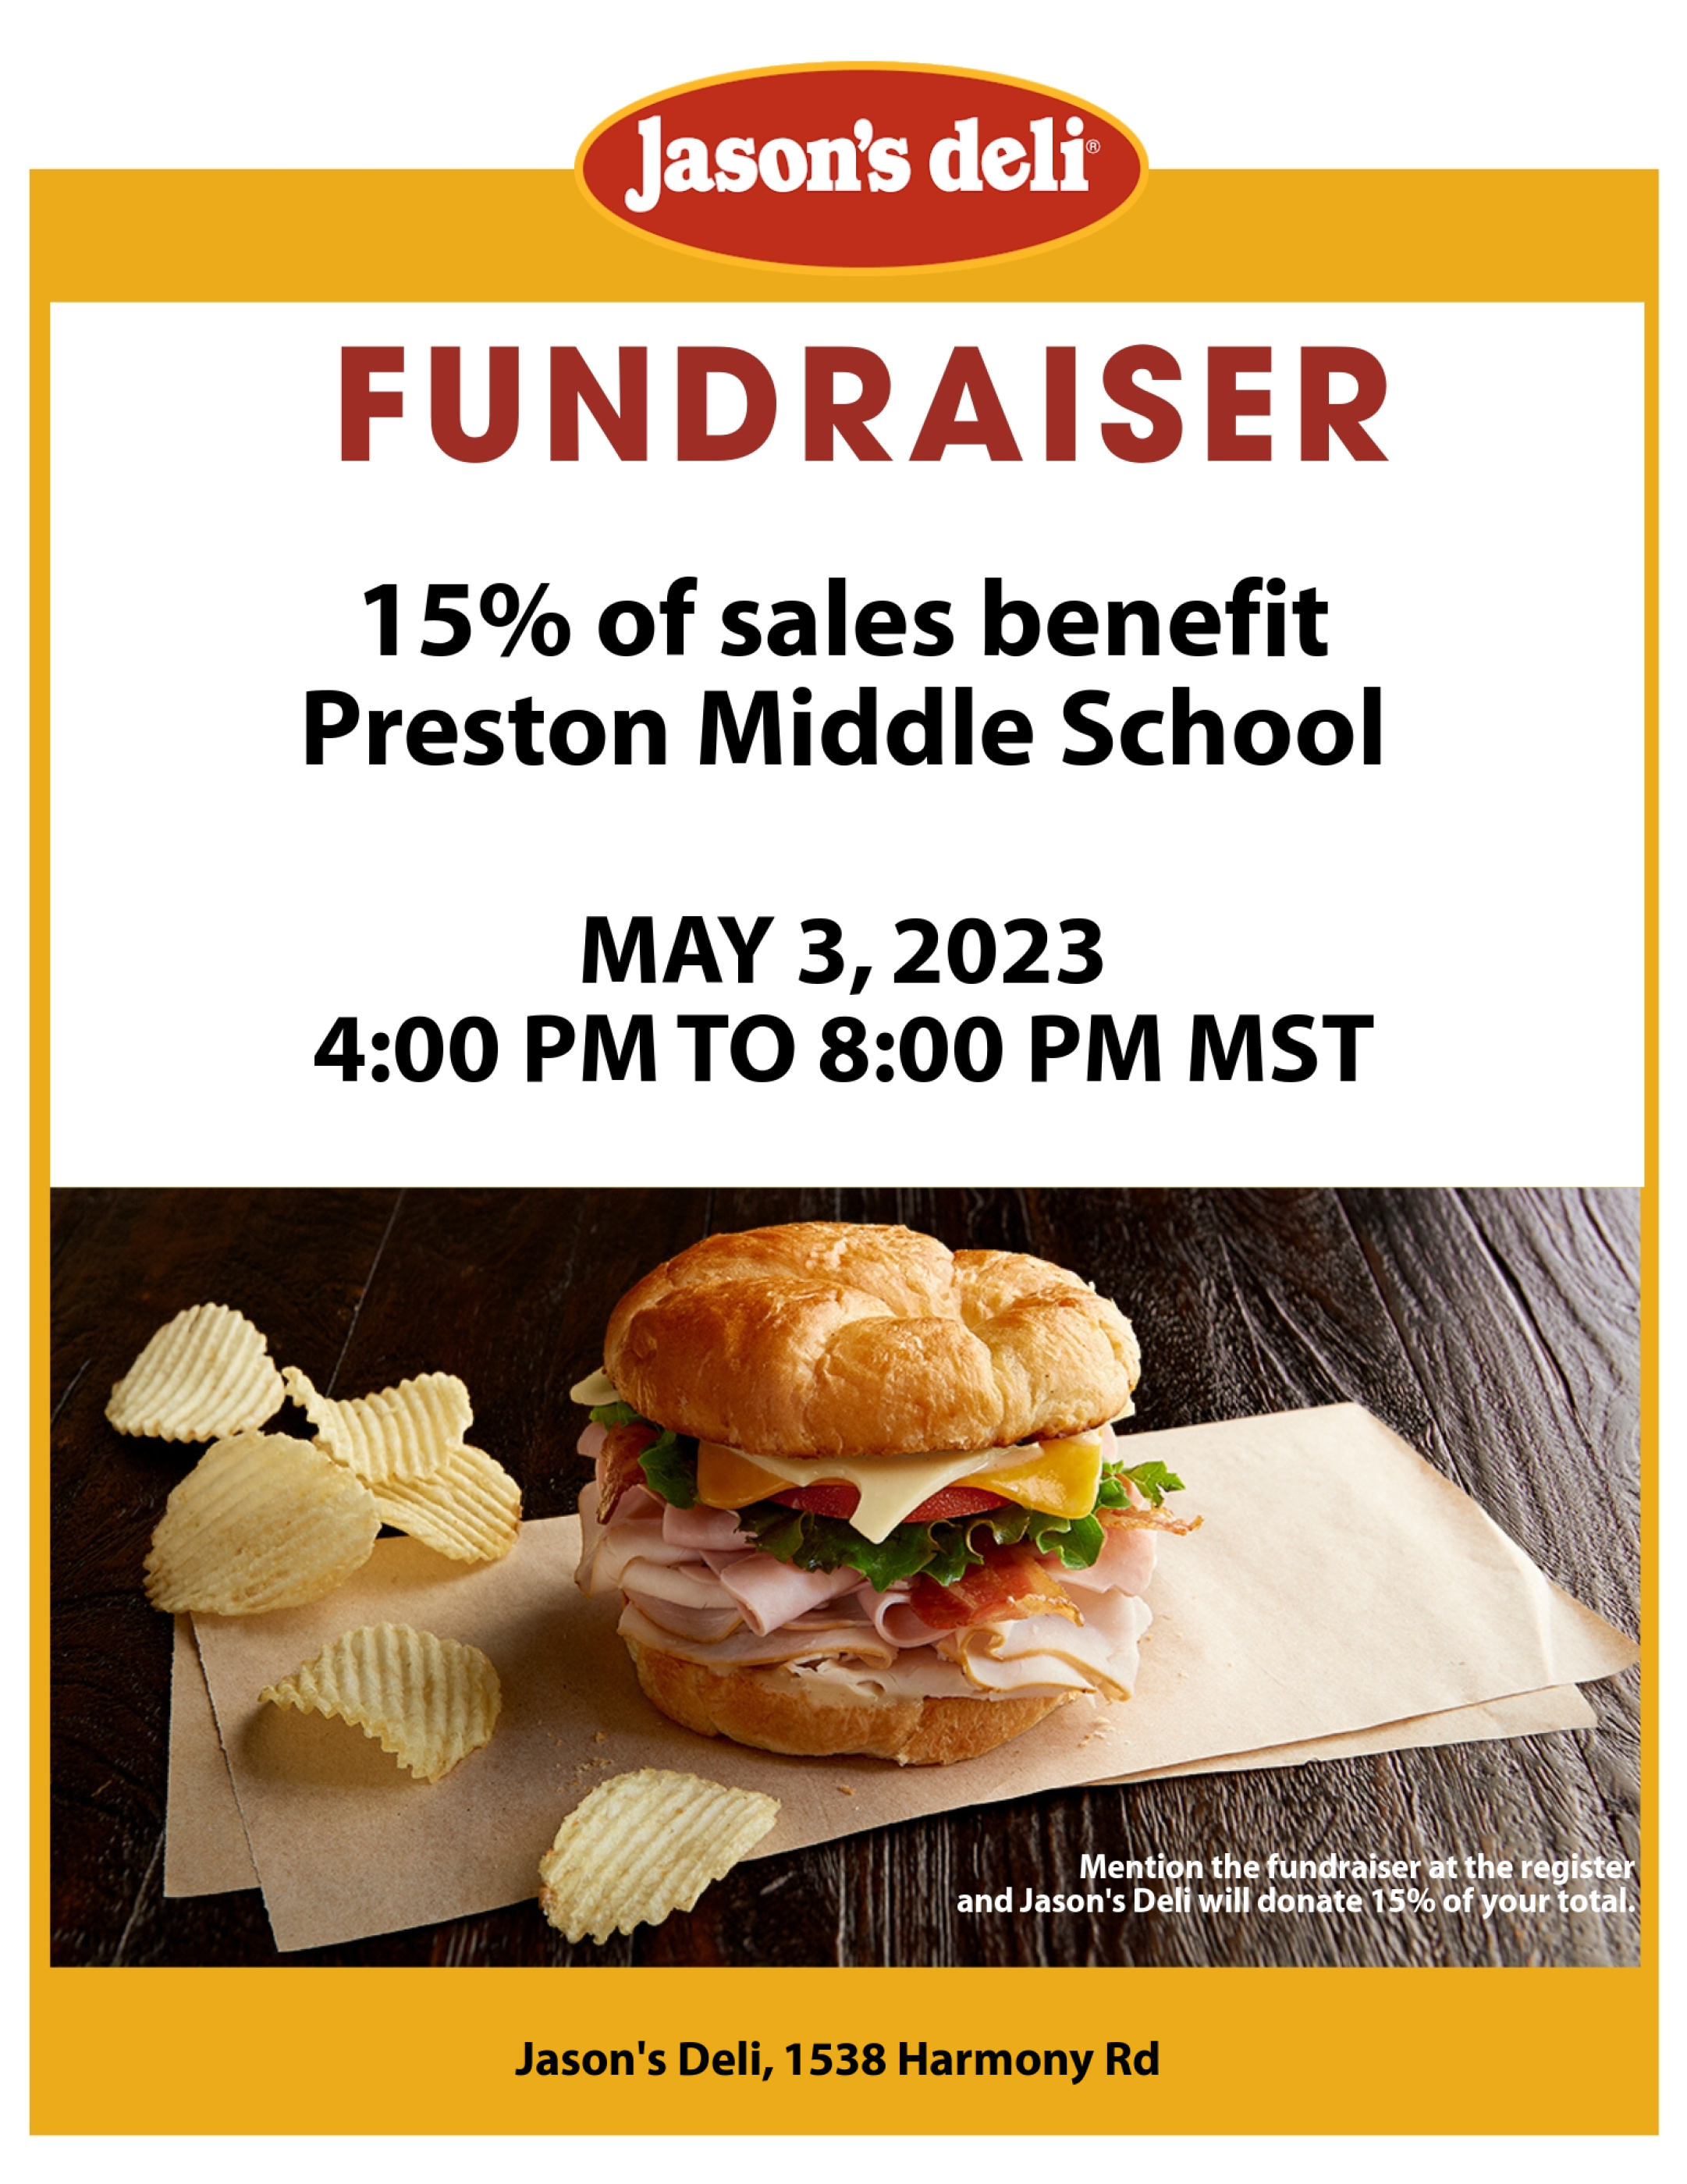 Join us today at Jason's Deli for a Preston fundraiser